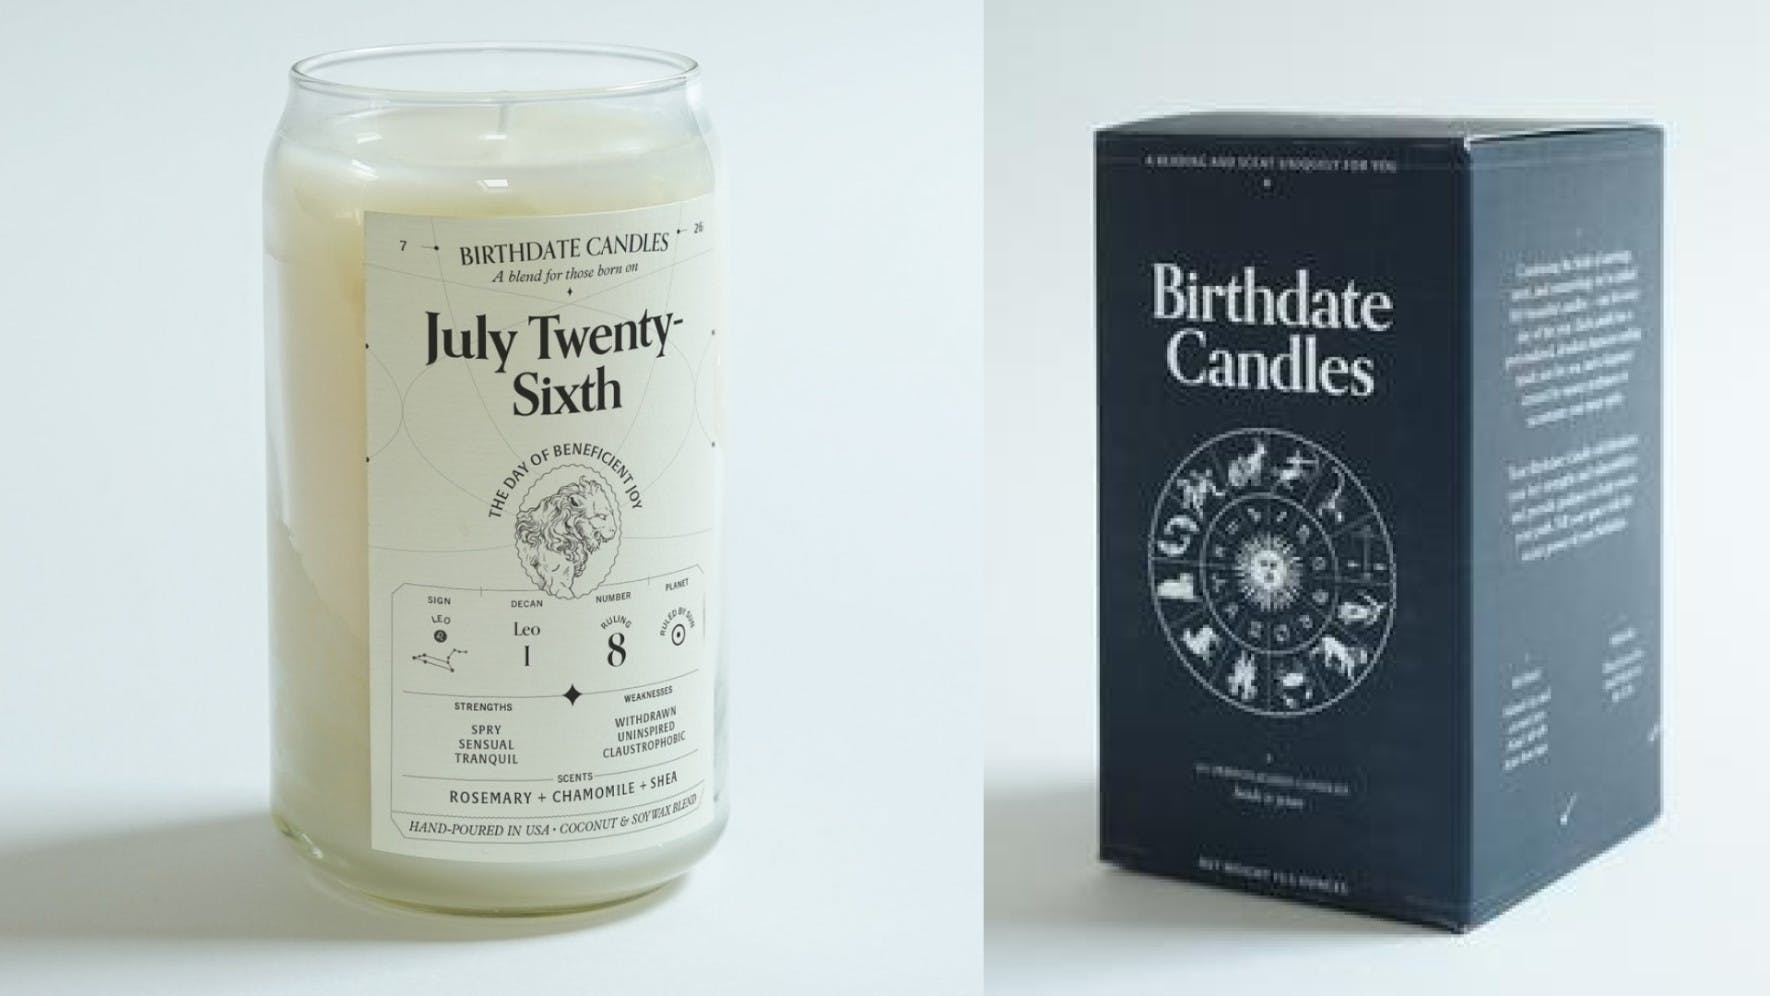 An all-natural candle inspired by the day they were born...